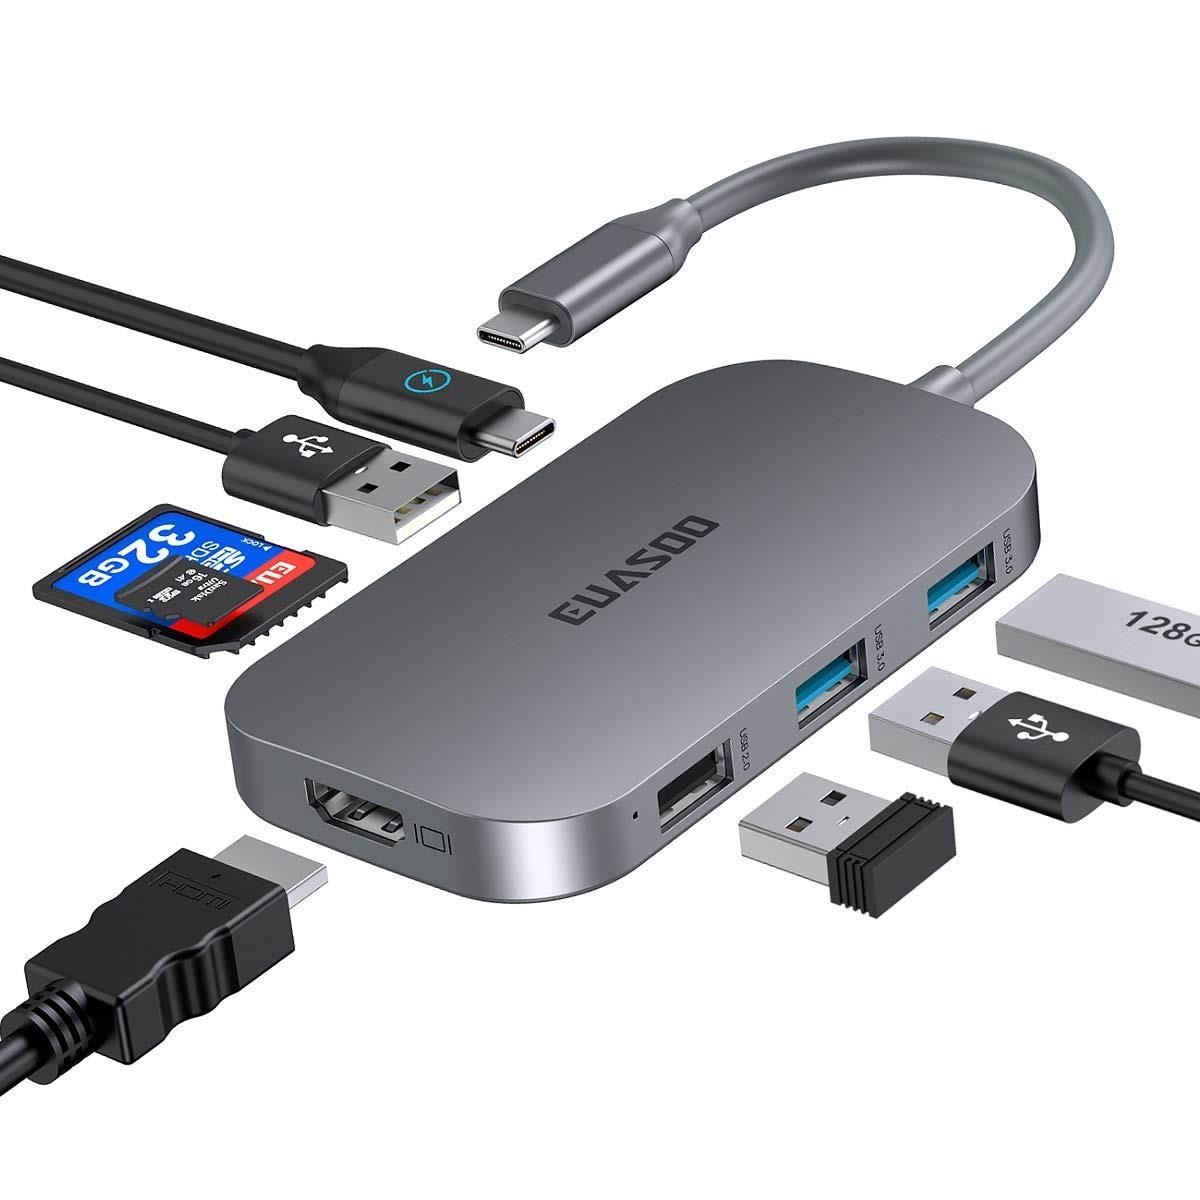 The Best HDMI Adapters for Turning Your Galaxy Note 10 into a DeX Desktop